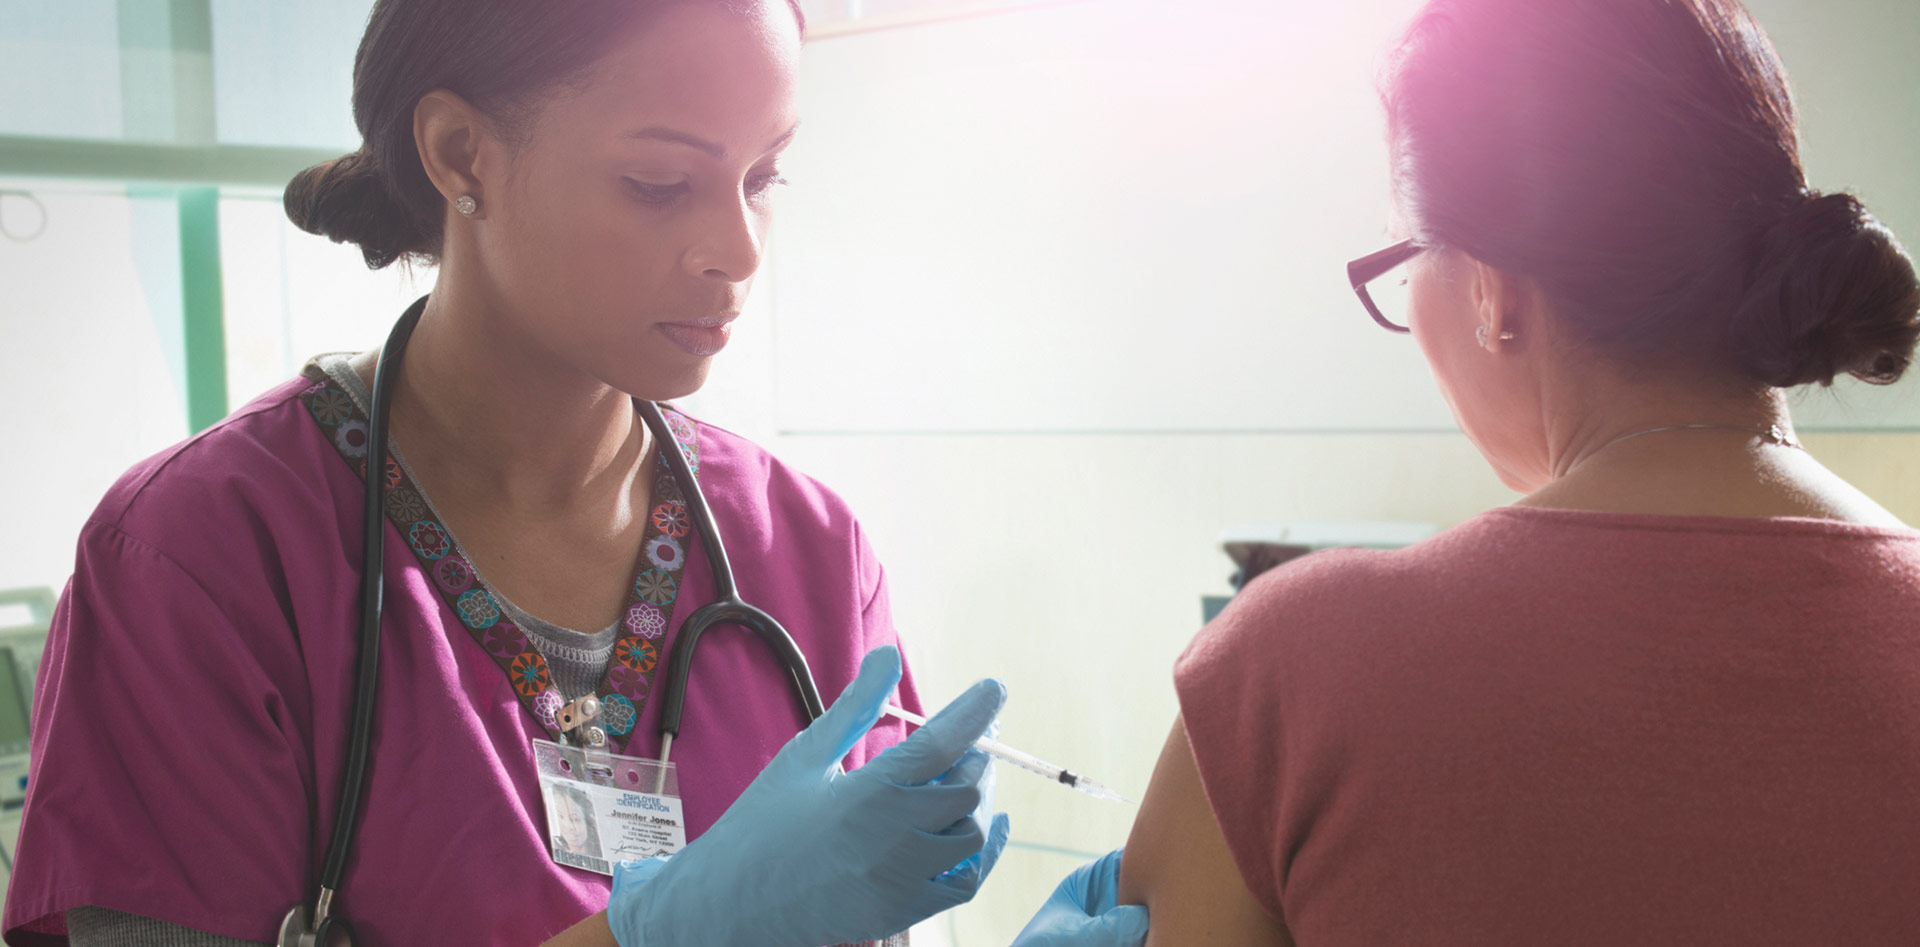 Female nurse administering injectable medication into a female patient